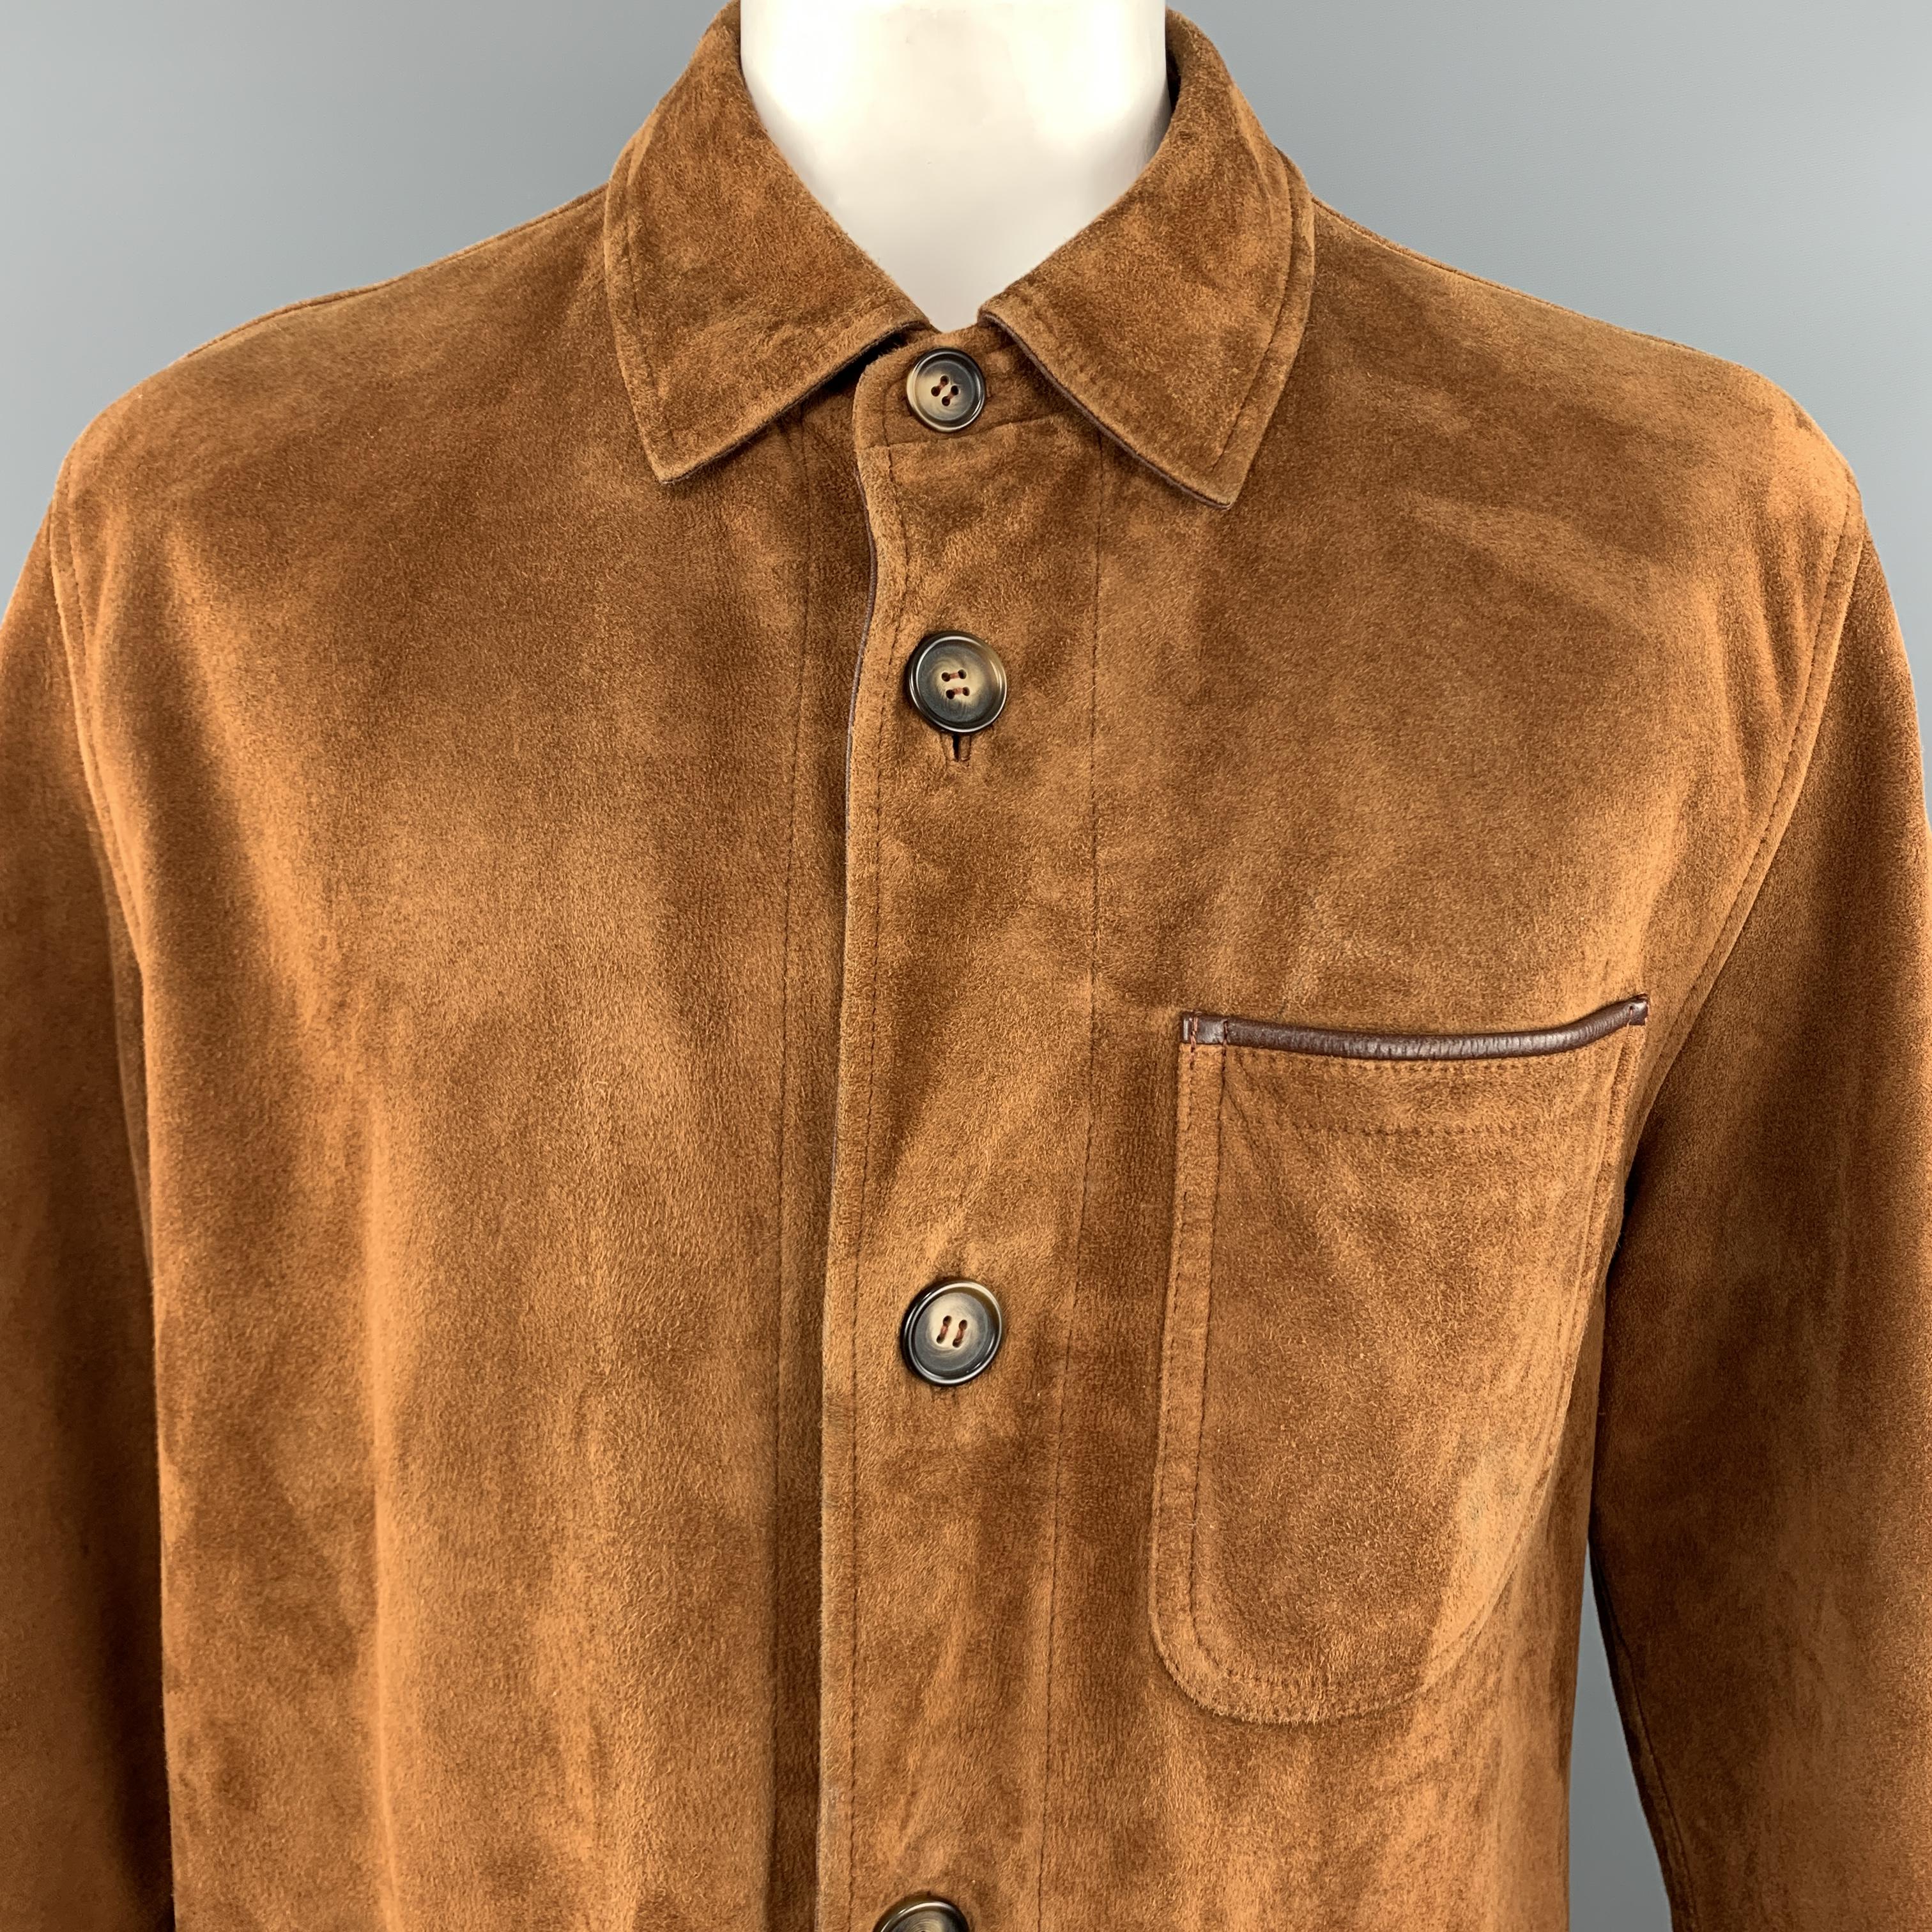 SULKA coat comes in warm tan suede with brown leather piping, pointed collar, patch pockets, and half liner. Imperfections throughout suede. As-is. Made in Italy.
 
Very Good Pre-Owned Condition.
Marked: IT 50
 
Measurements:
 
Shoulder: 20